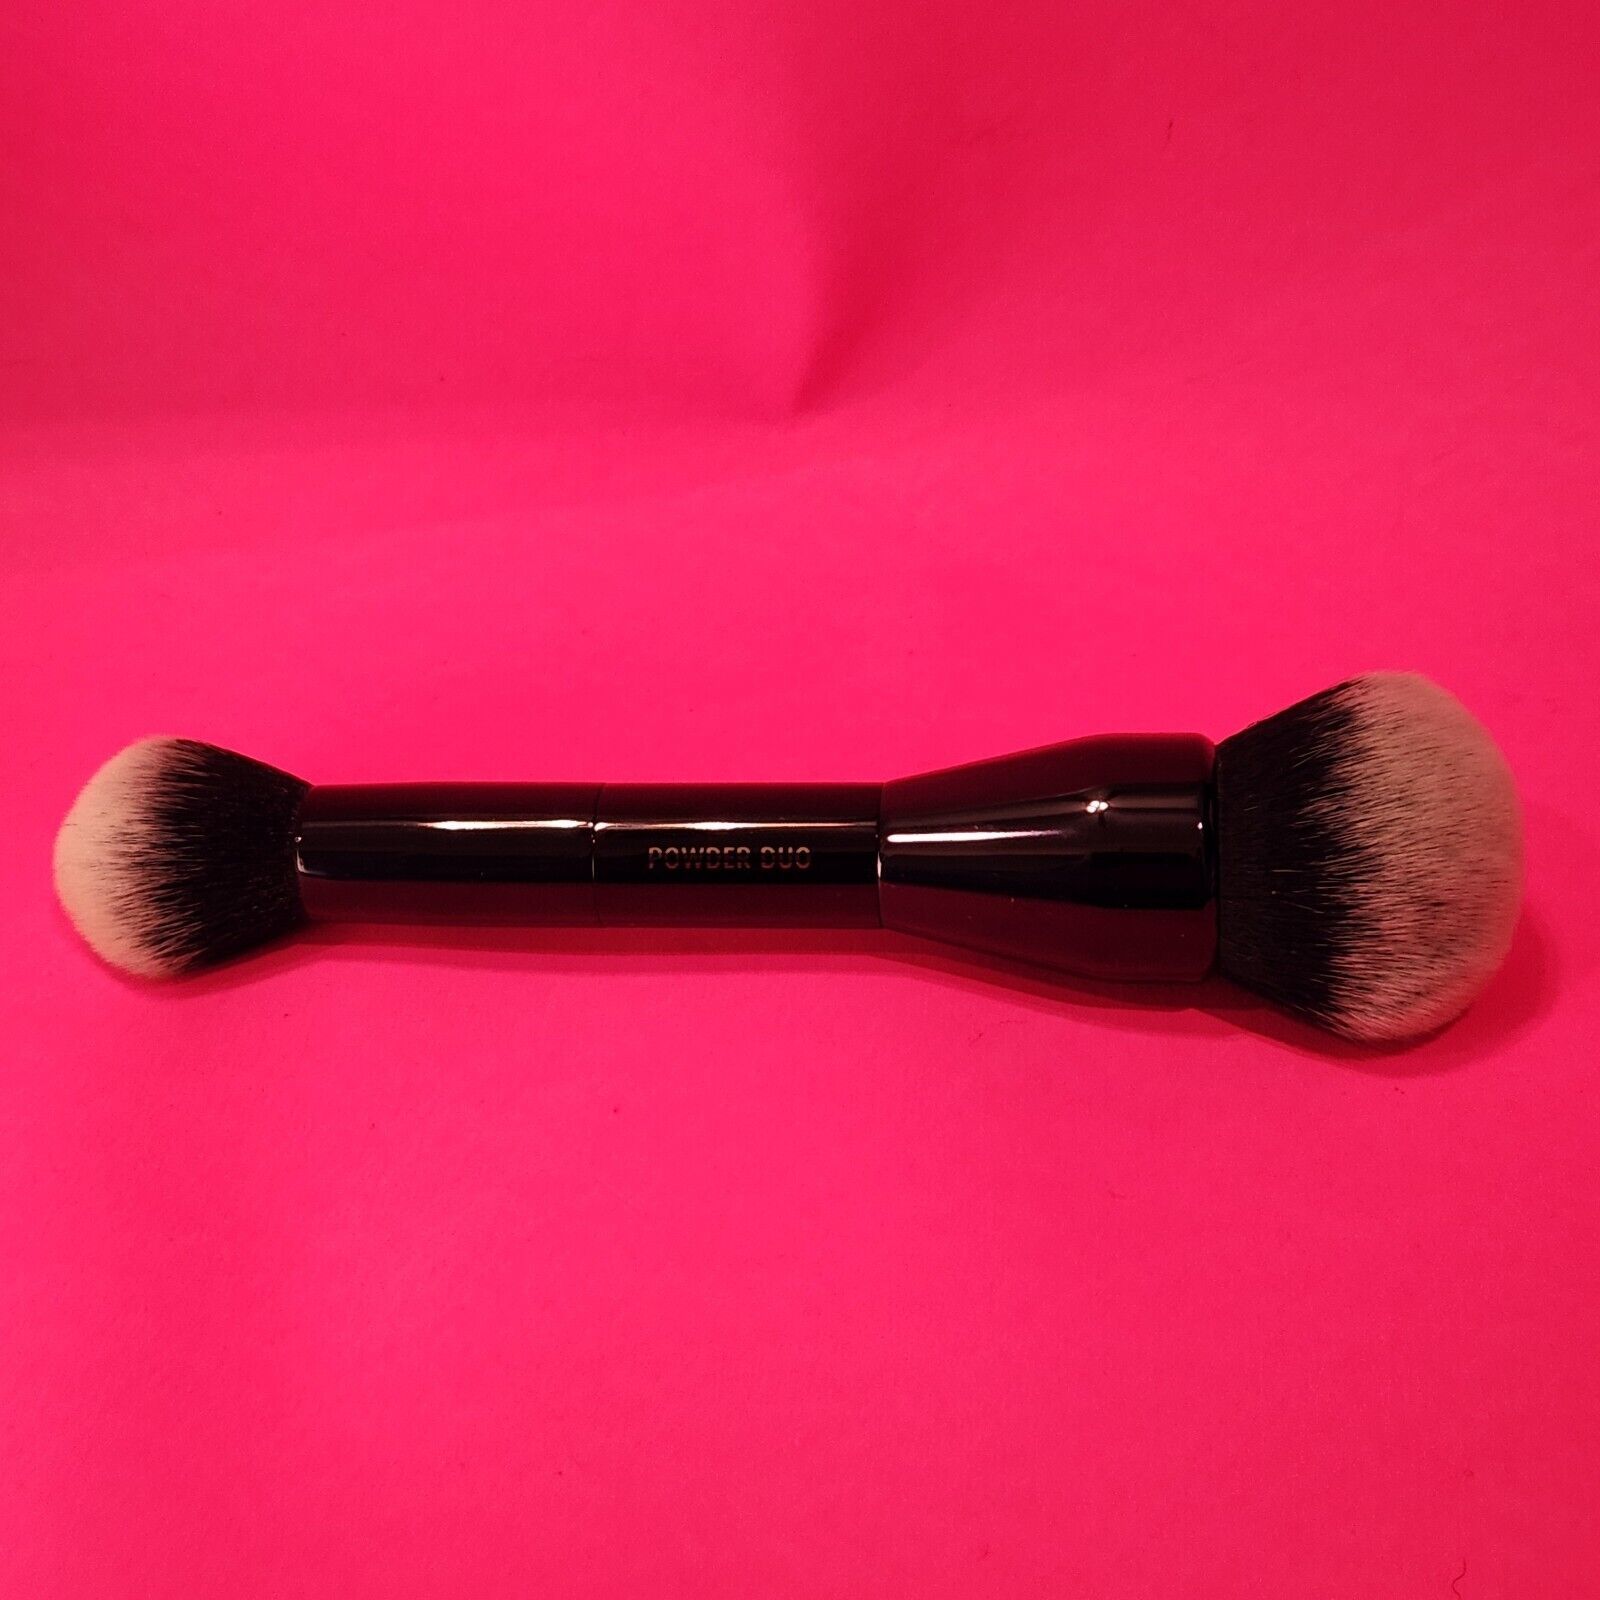 Primary image for Lune+Aster Powder Duo Brush